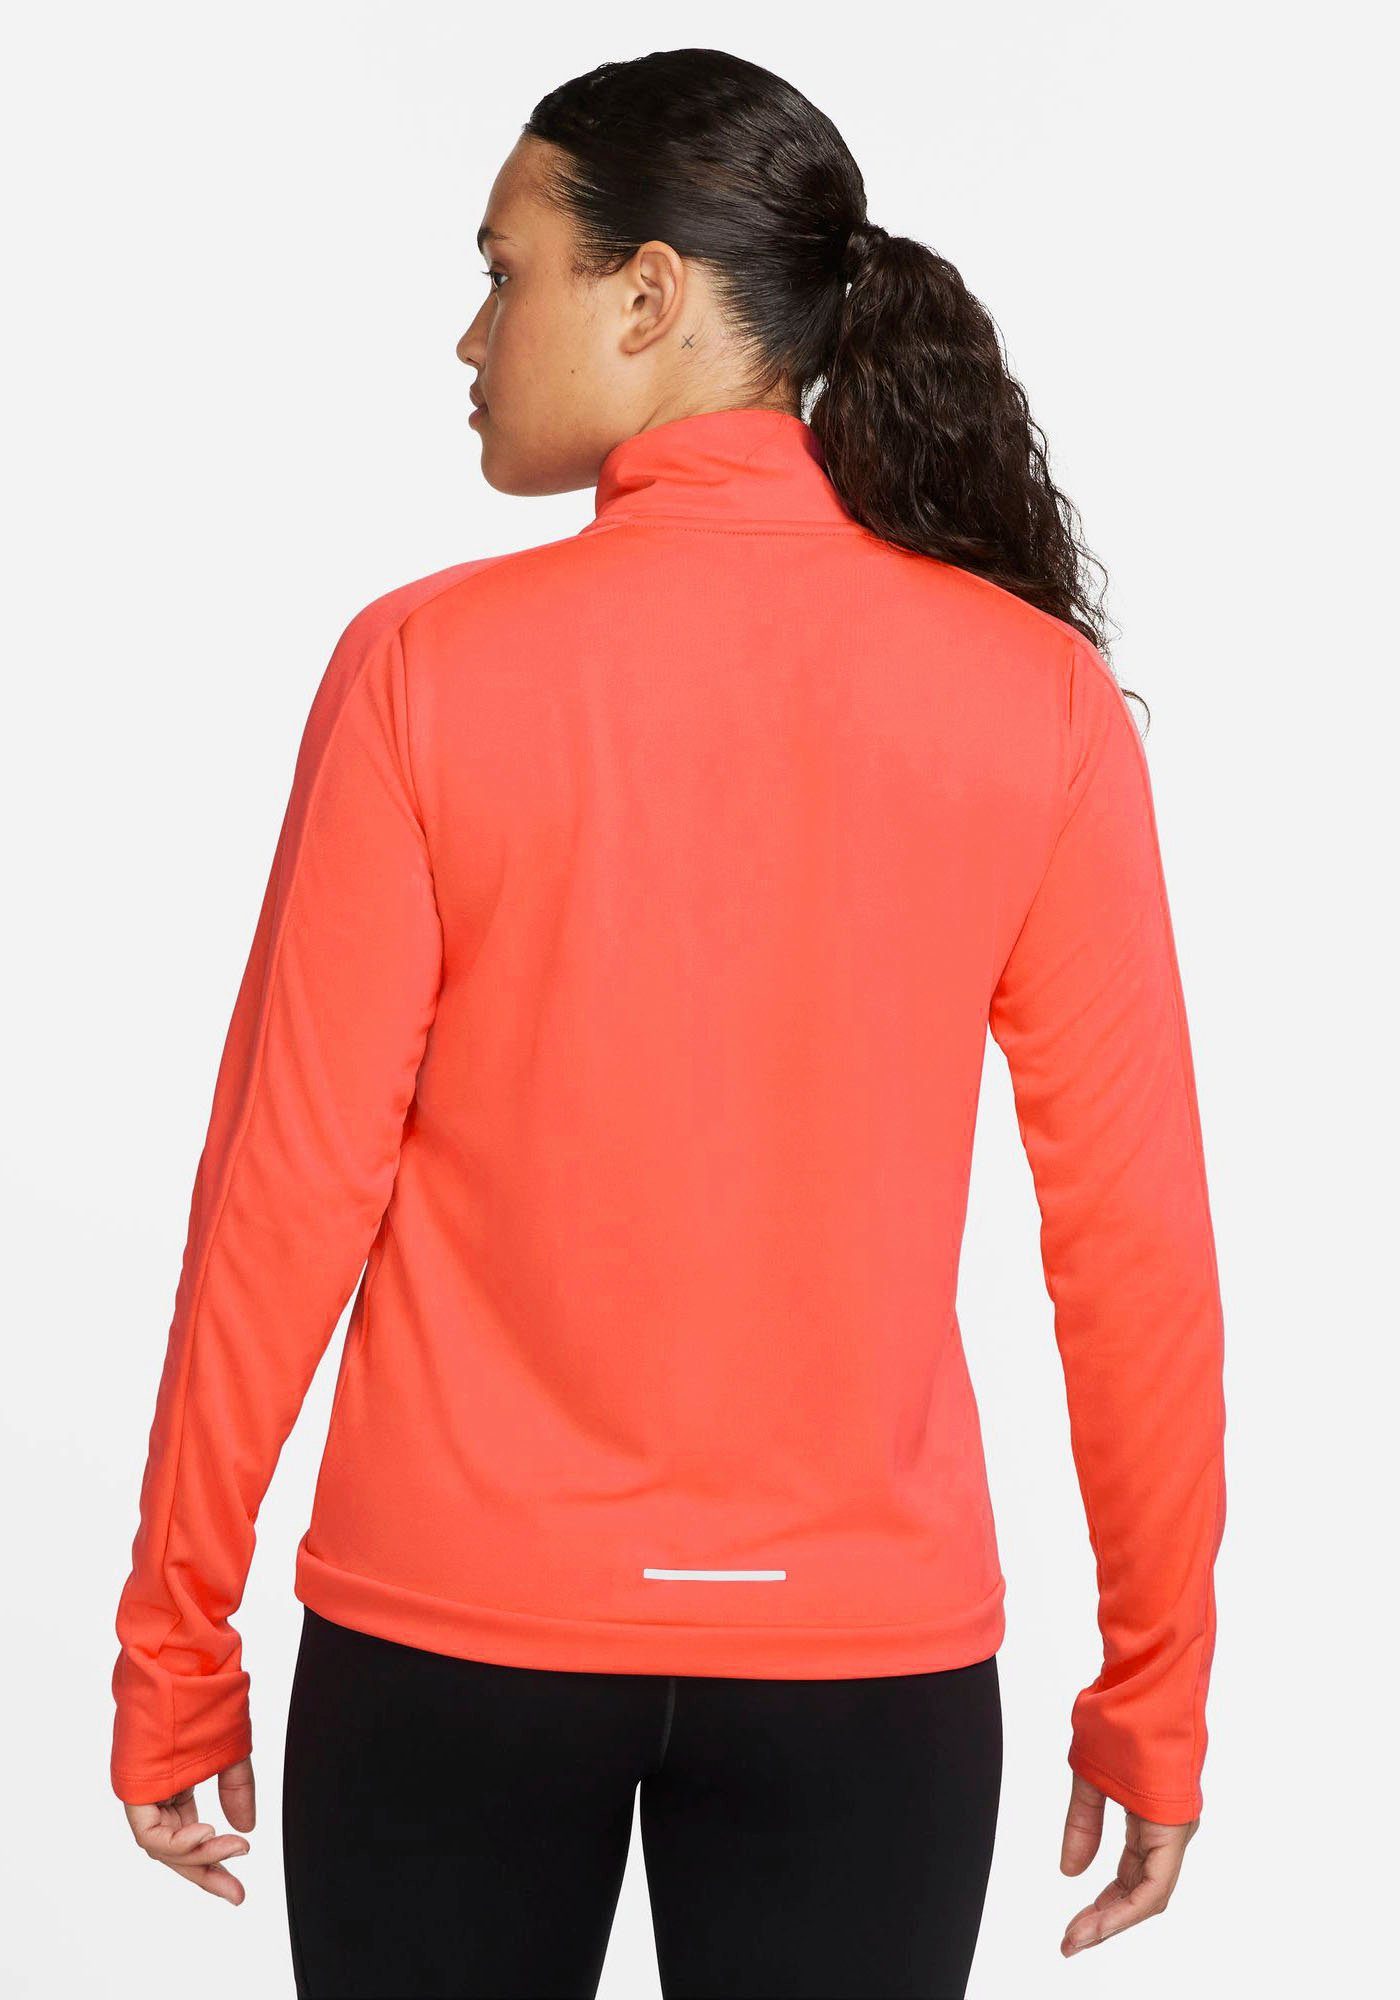 1/-ZIP Laufshirt PACER DRI-FIT Nike SILV PULLOVER GLOW/REFLECTIVE EMBER WOMEN'S